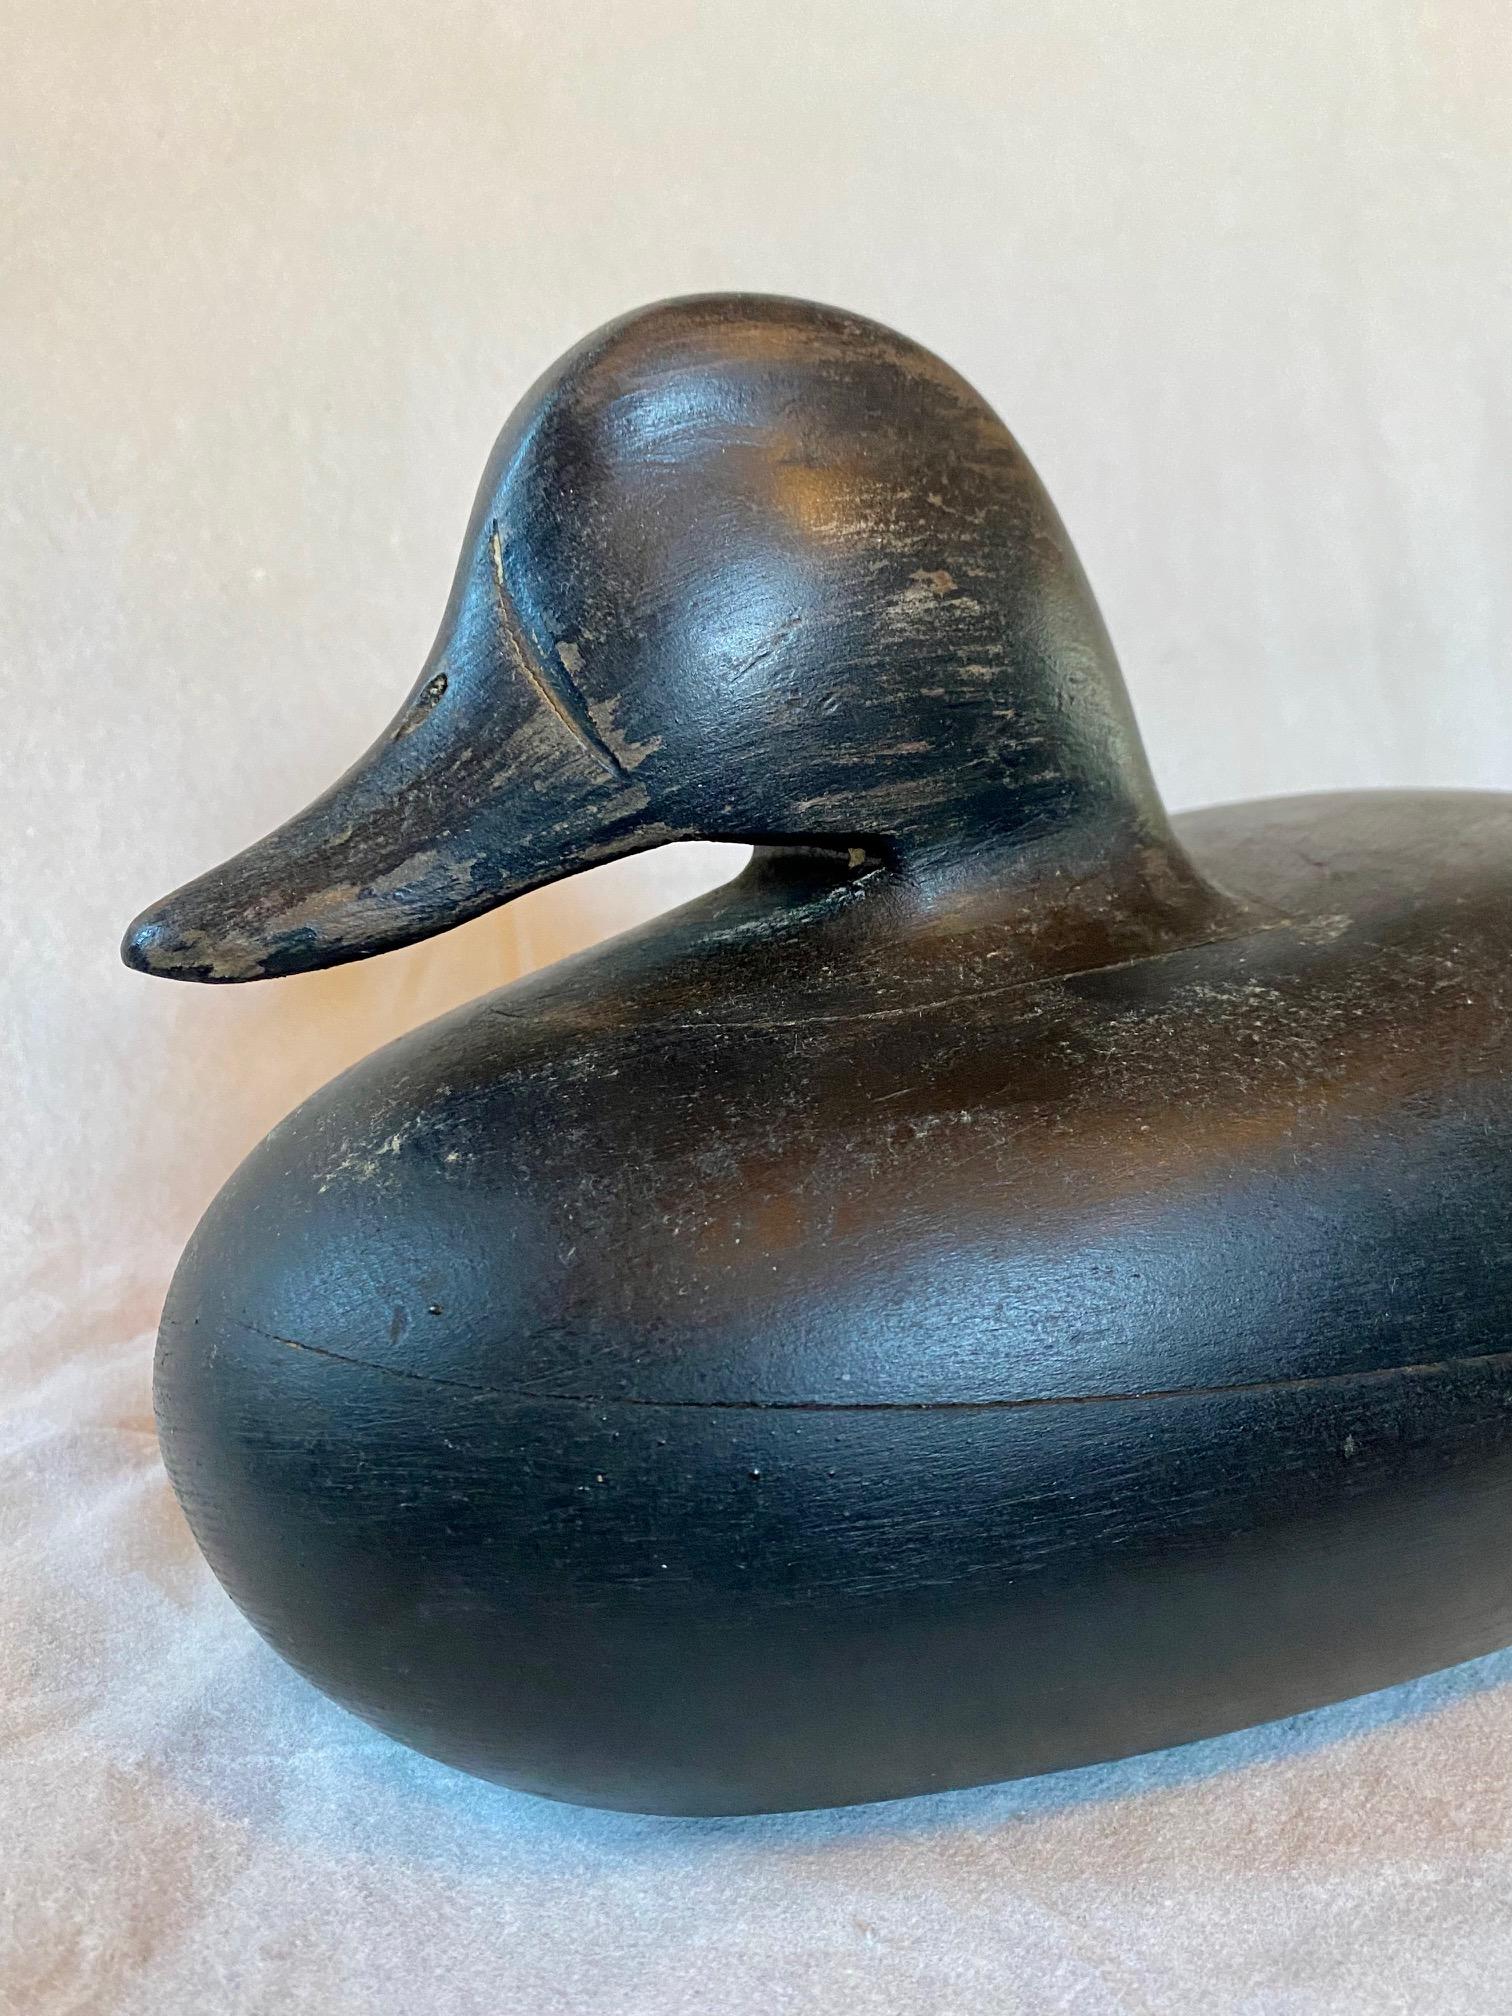 Carved and Painted Black Duck Decoy, by Pat Gardner, Nantucket, circa 1960s, a carved wooden working decoy style black duck with head set well back on shelf in the content posture, with carved mandible and nares, on plump body with paddle tail,